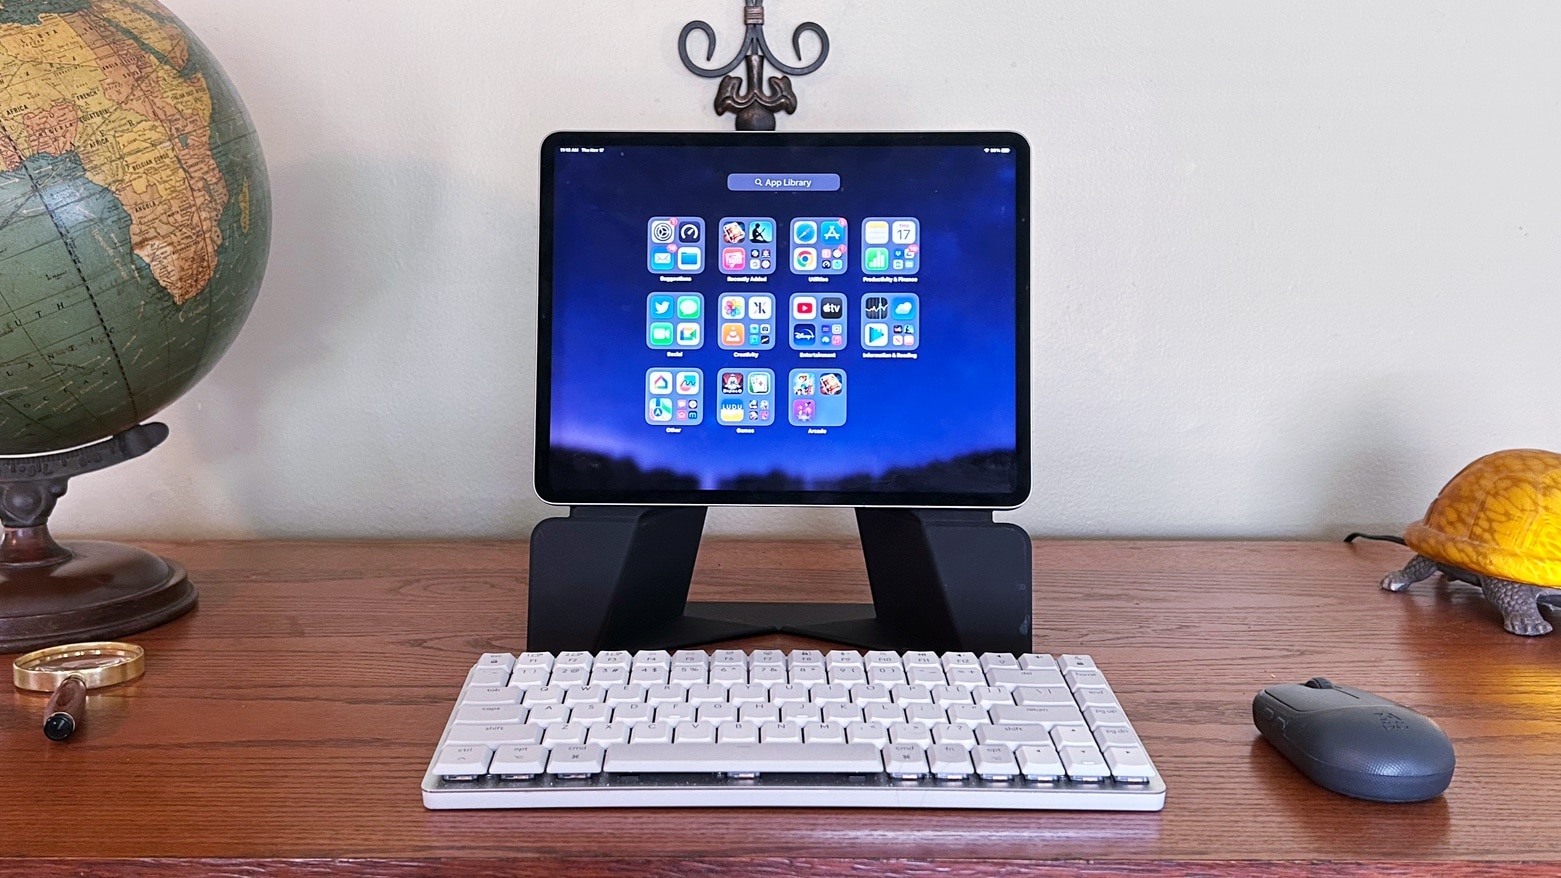 Brilliant origami case/stand raises iPad to eye level [Updated review]